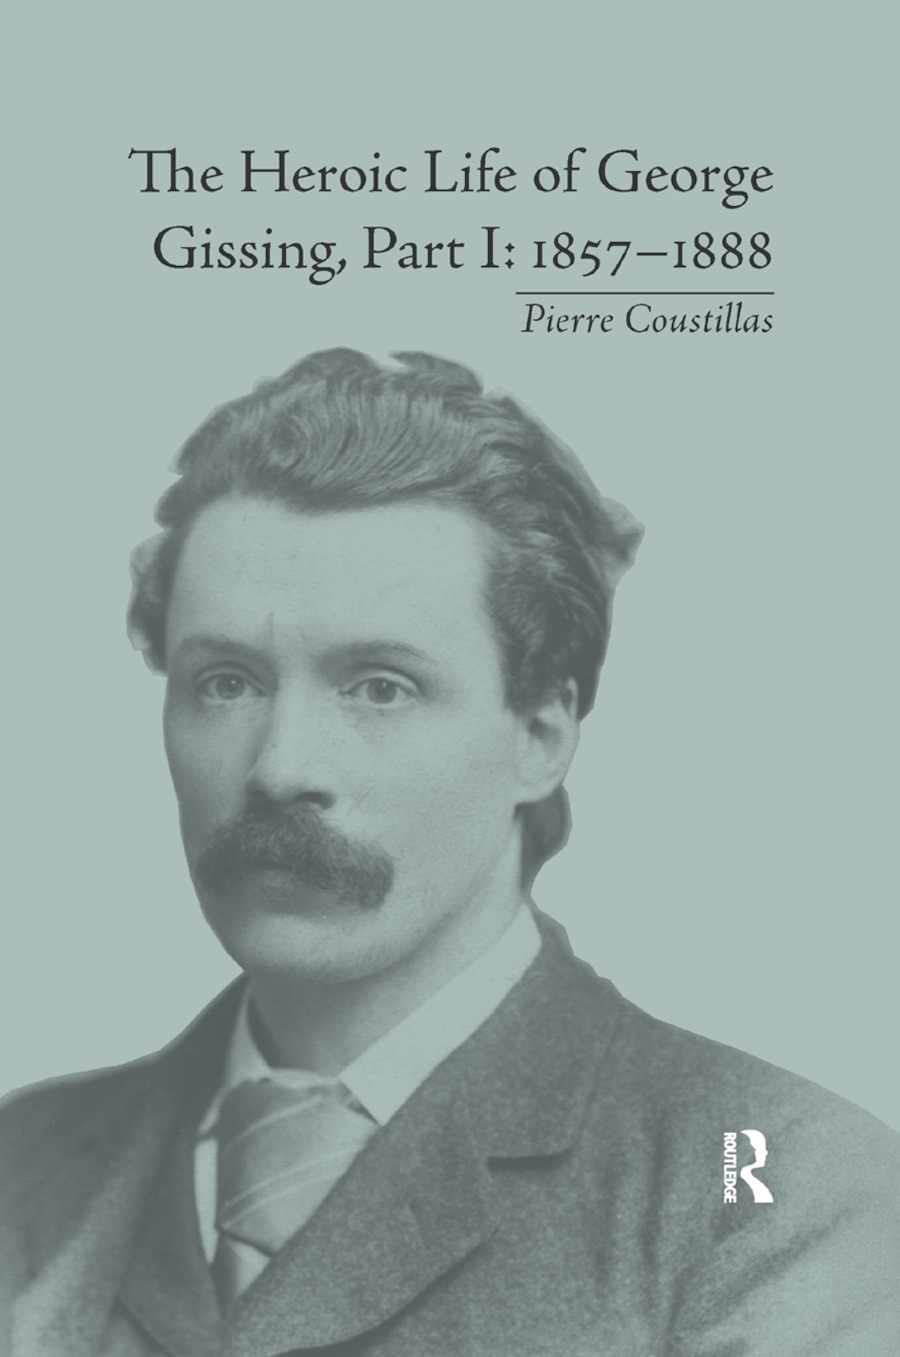 The Heroic Life of George Gissing, Part I: 1857�1888